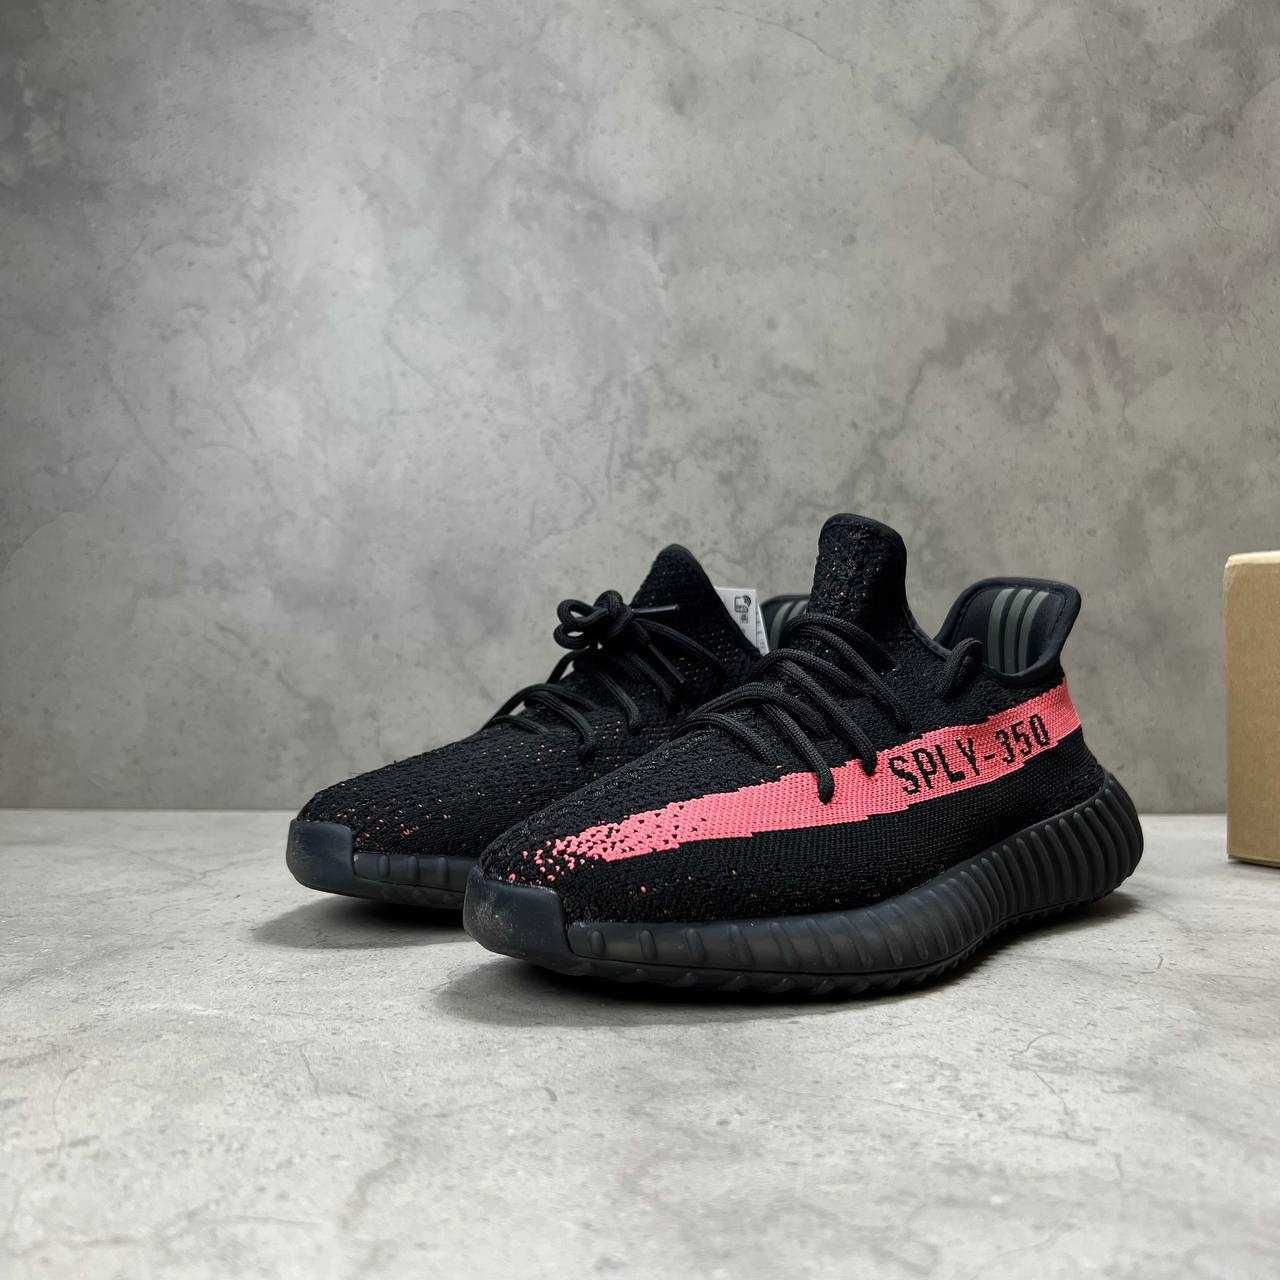 Adidas Yeezy Boost 350 V2 Core Red - 40,41,42,43,44,45,46